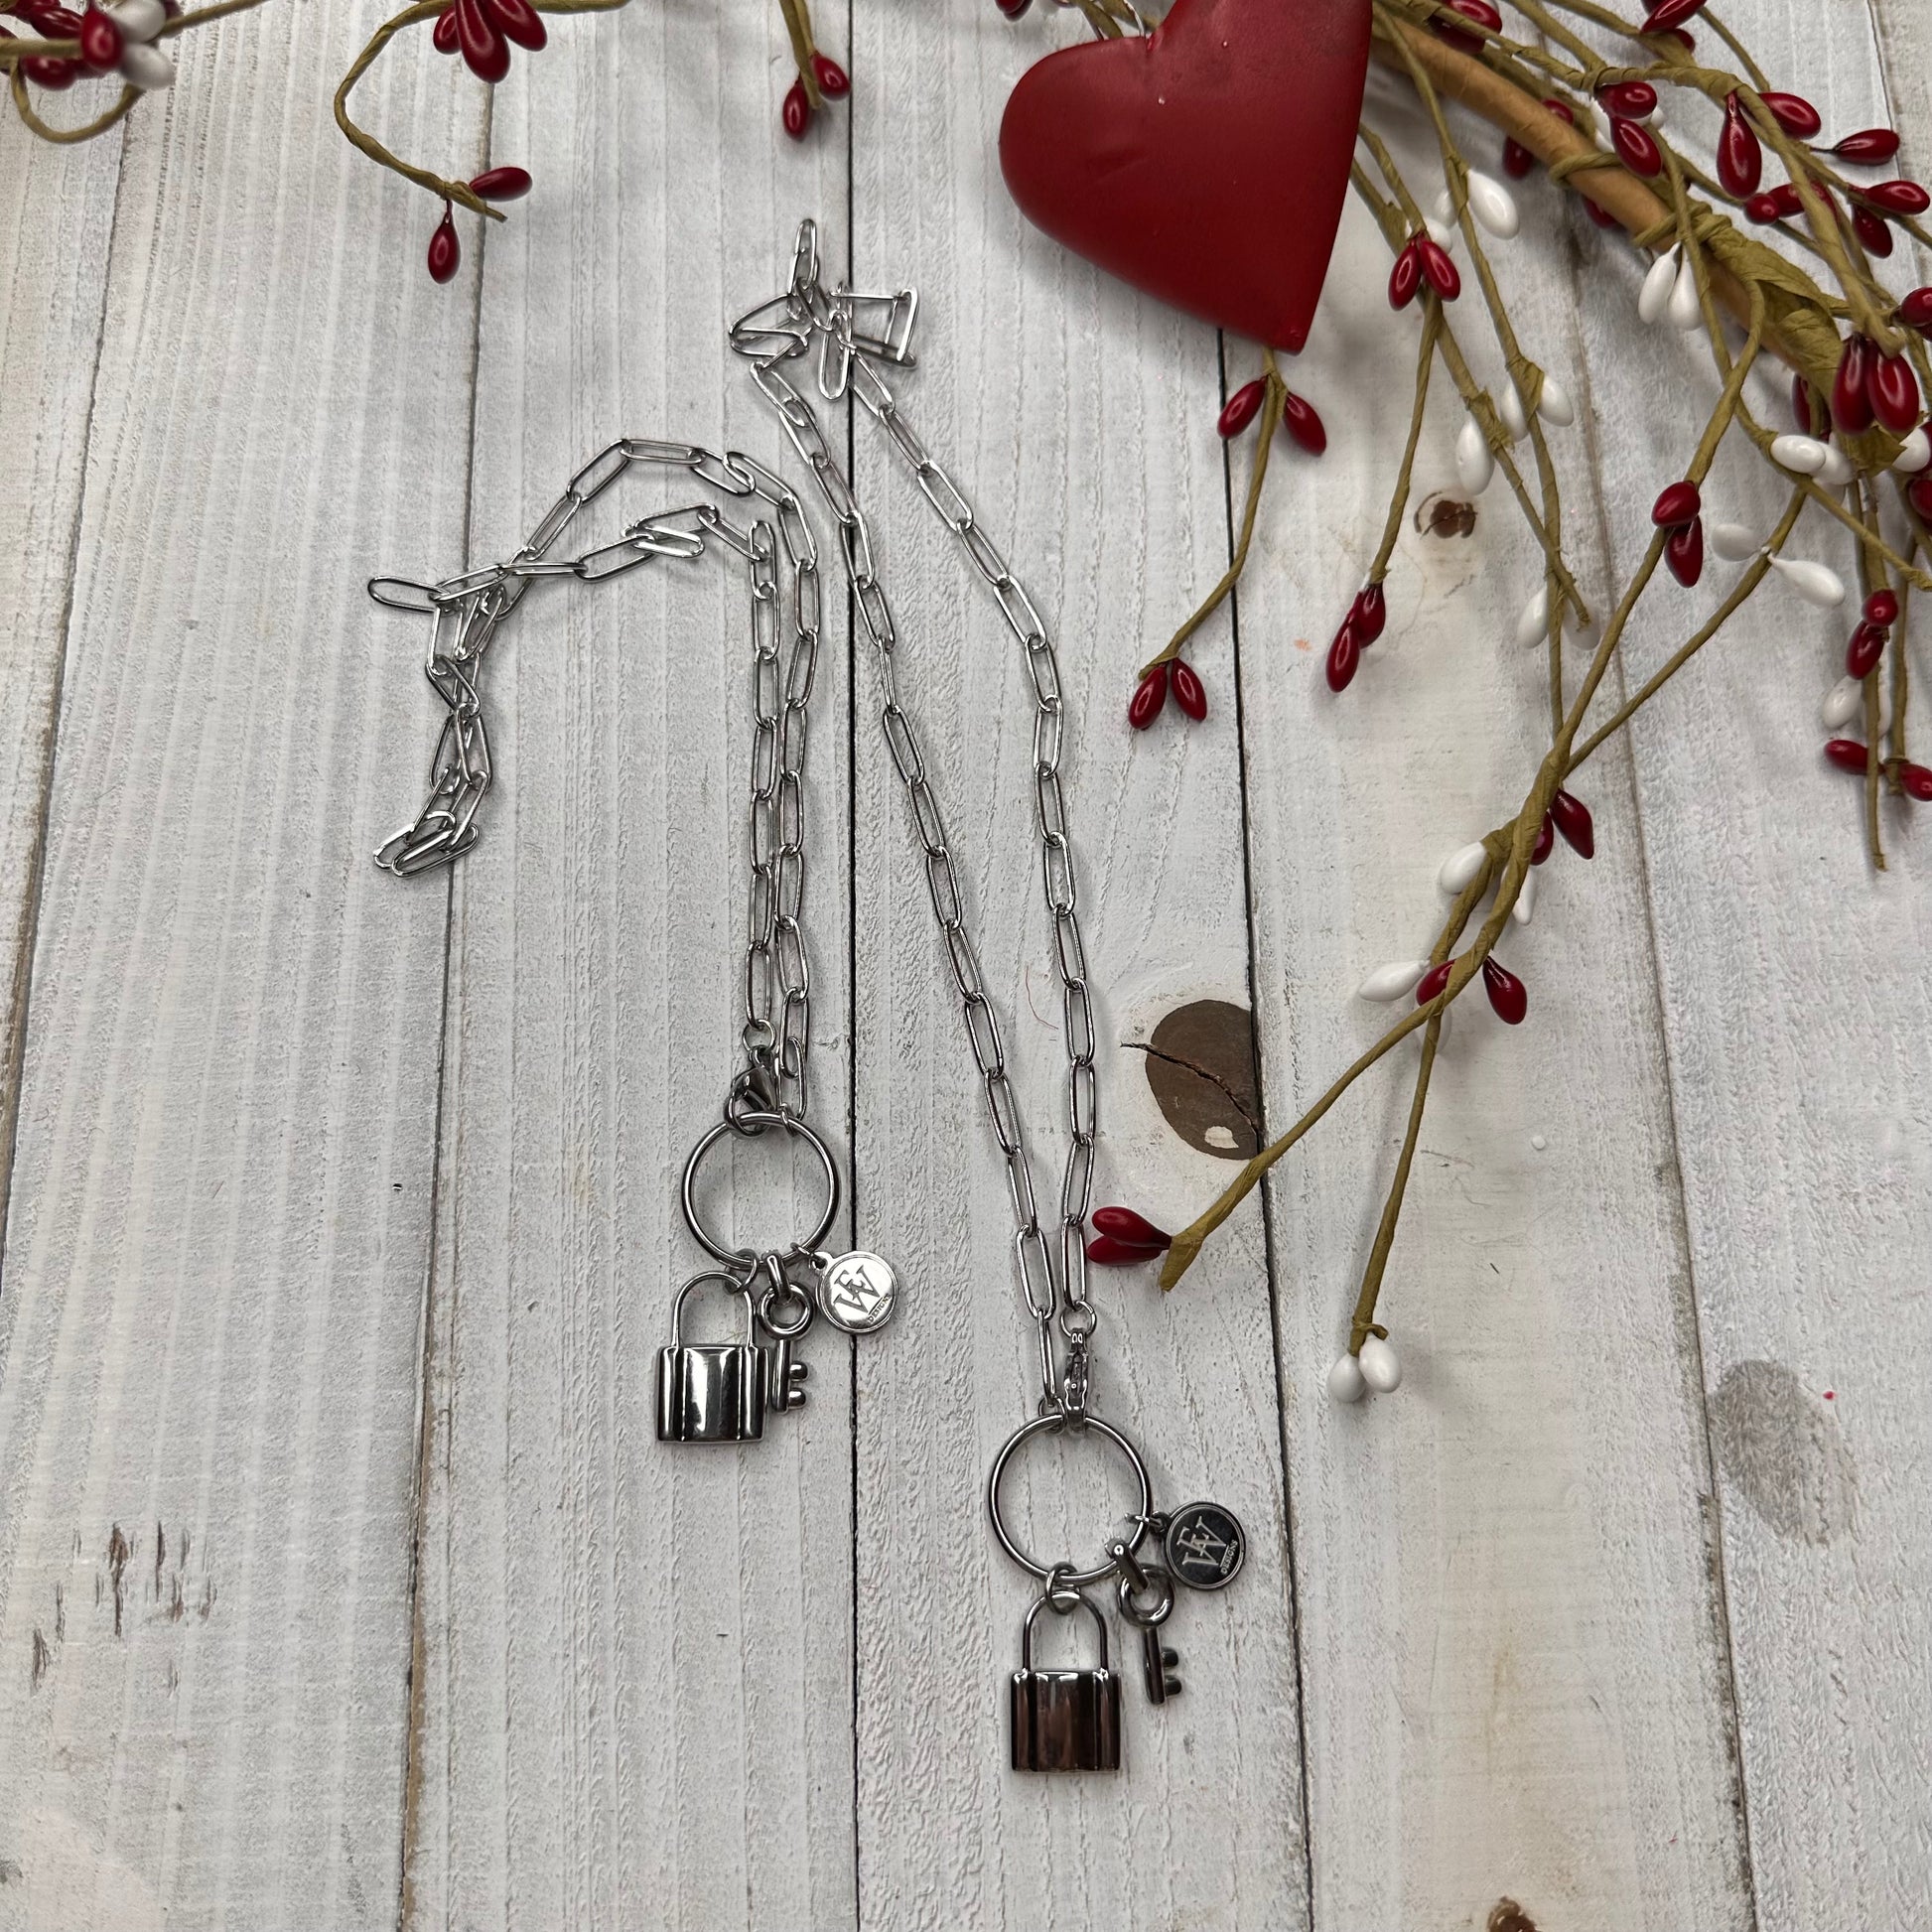 Stainless Steal Paper Clip Link Necklace with a Lock and Key as Charms